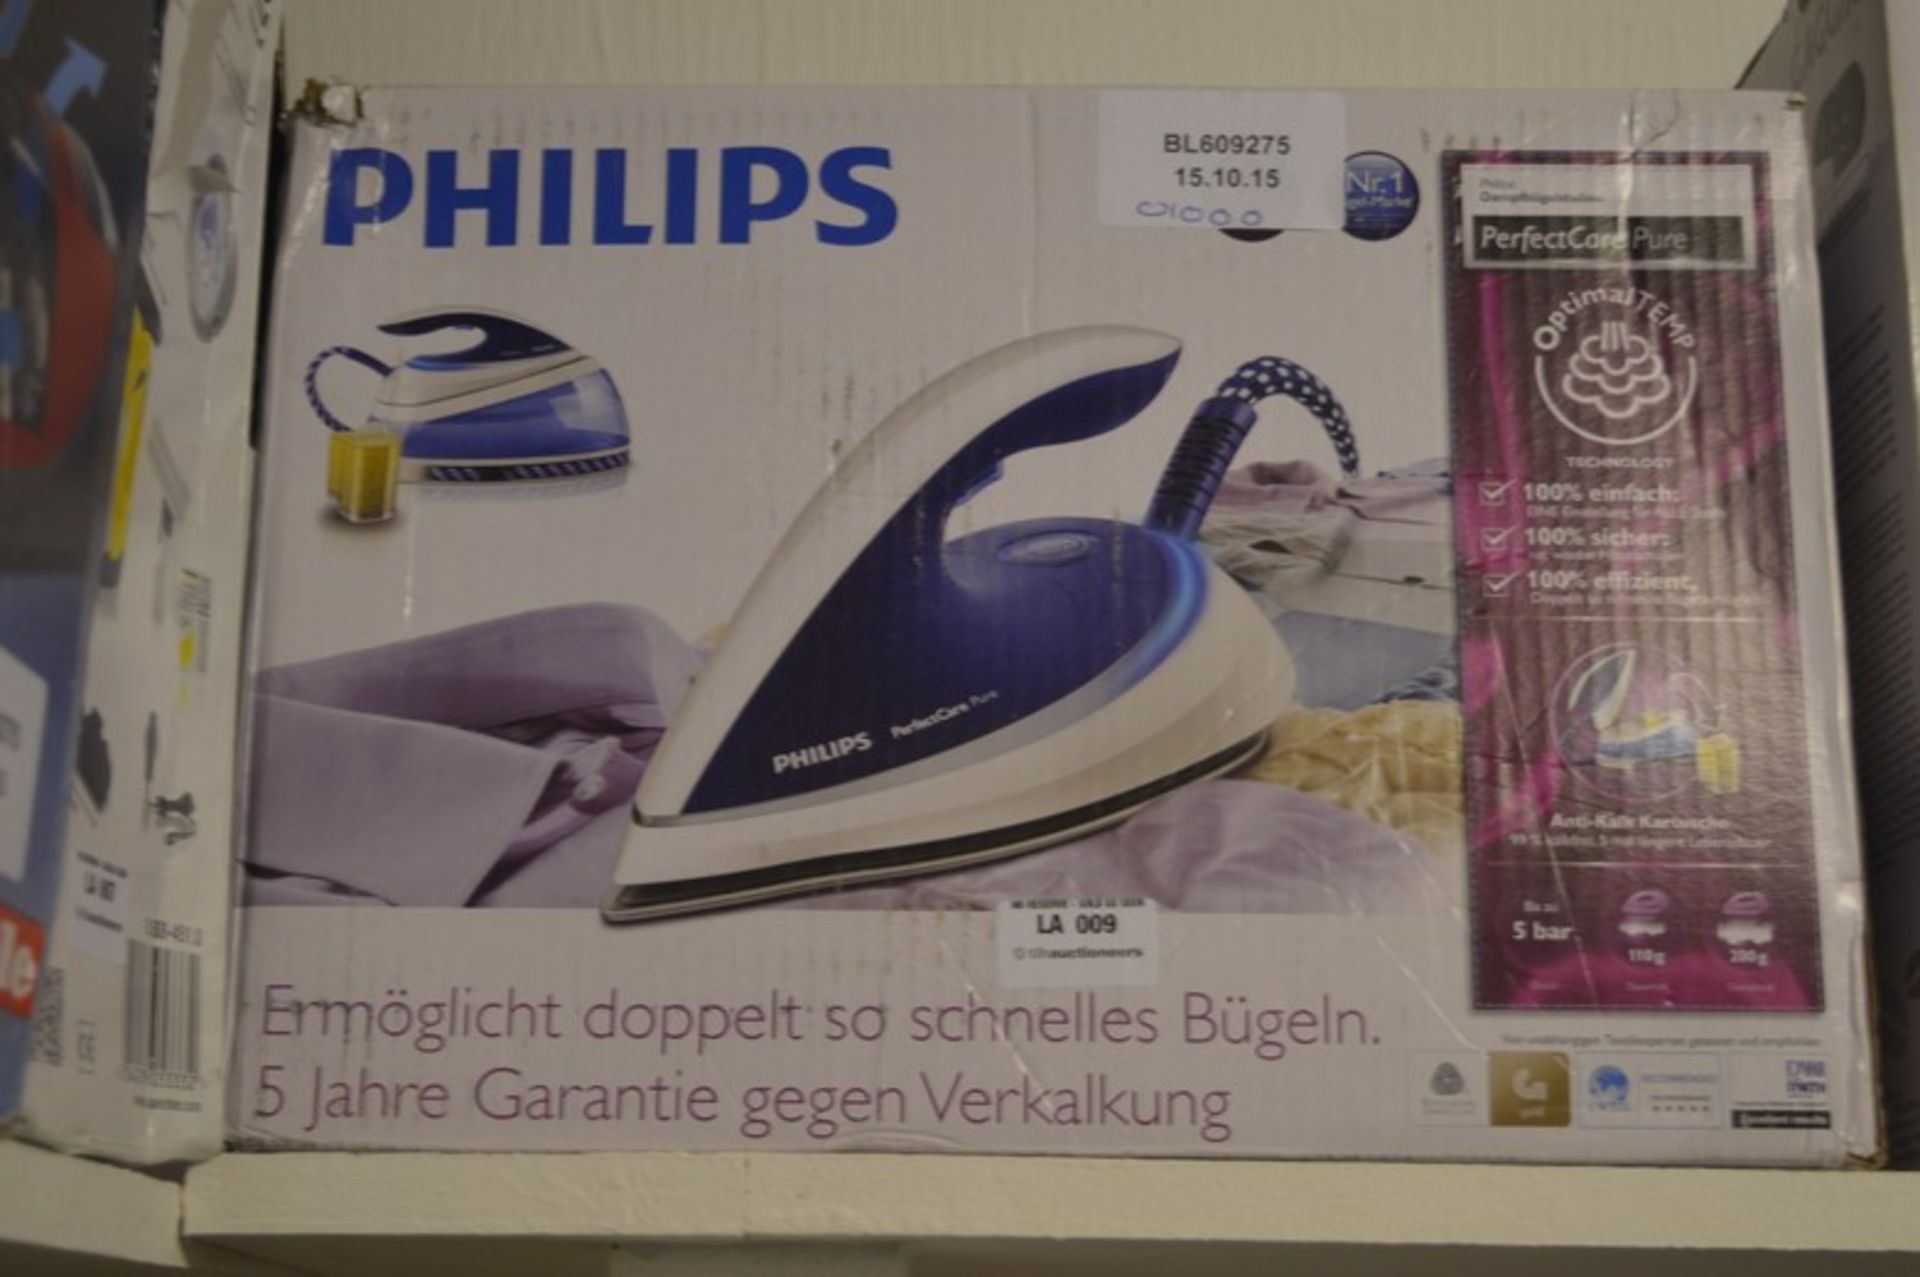 BOXED PHILIPS PERFECT CARE PURE STEAM GENERATOR IRON 5 BARR RRP £100.00 15/10/15